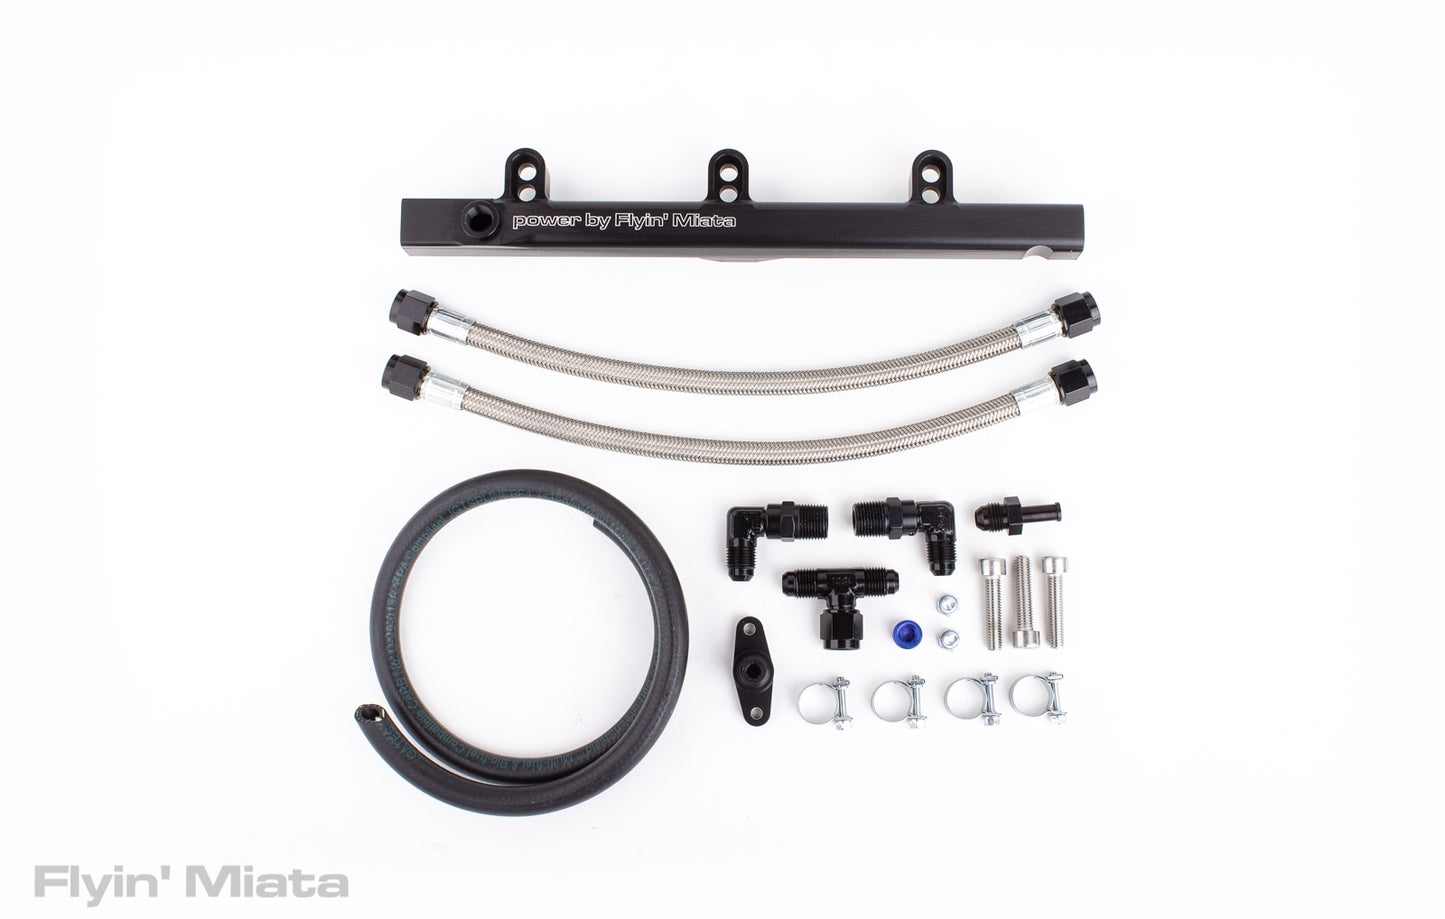 Flyin' Miata dual feed fuel rail with stainless steel feed lines for NA8 chassis